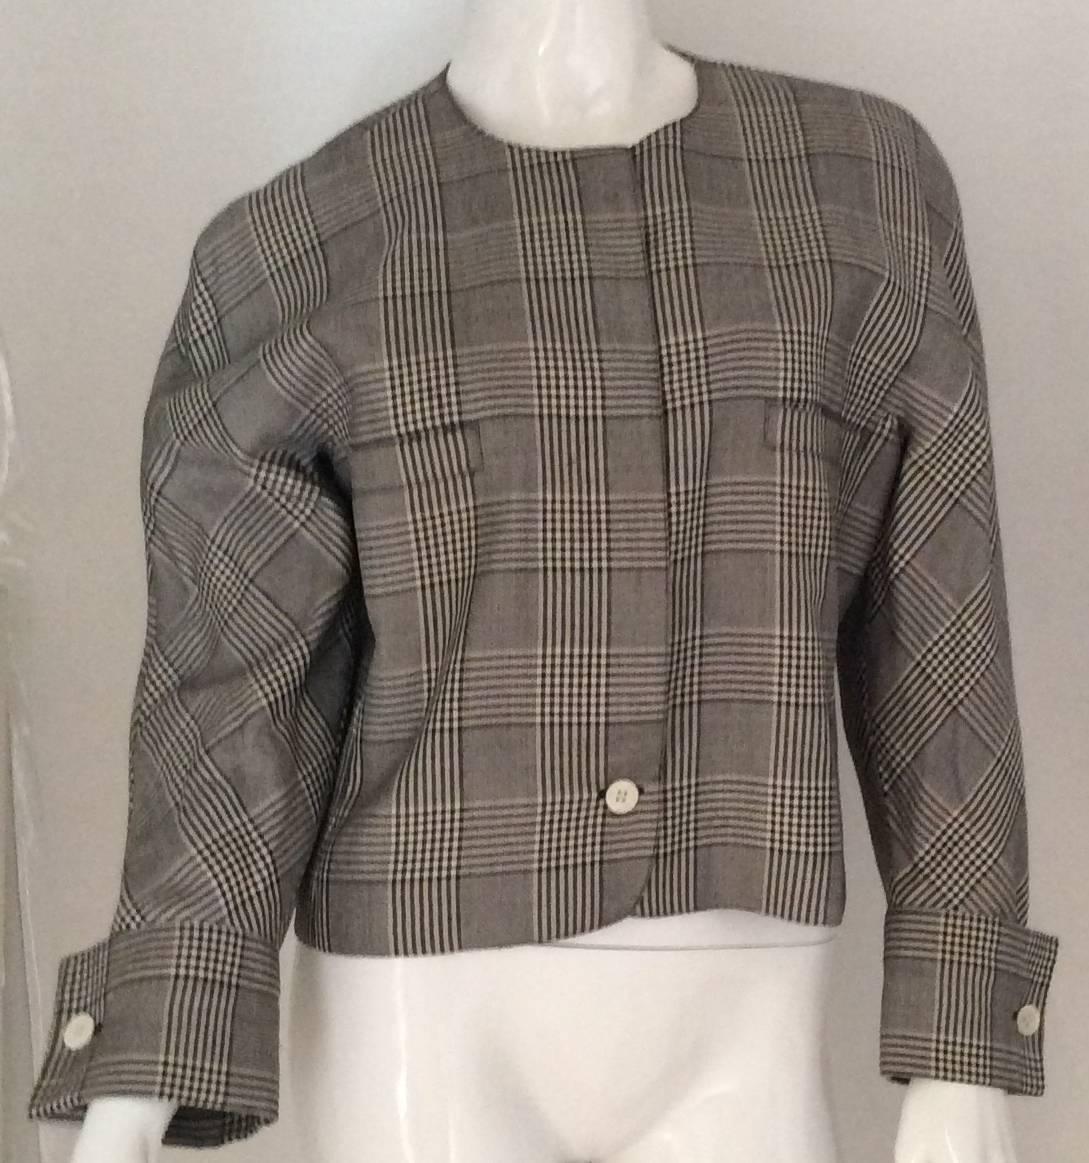 Genny was one of the leading manufacturers in the 1980's of quality, simple, tasteful and well cut clothing. This beautiful black and white houndstooth jacket is no exception. It has 5 white buttons up the front of the sleeve and two cuffed arms.